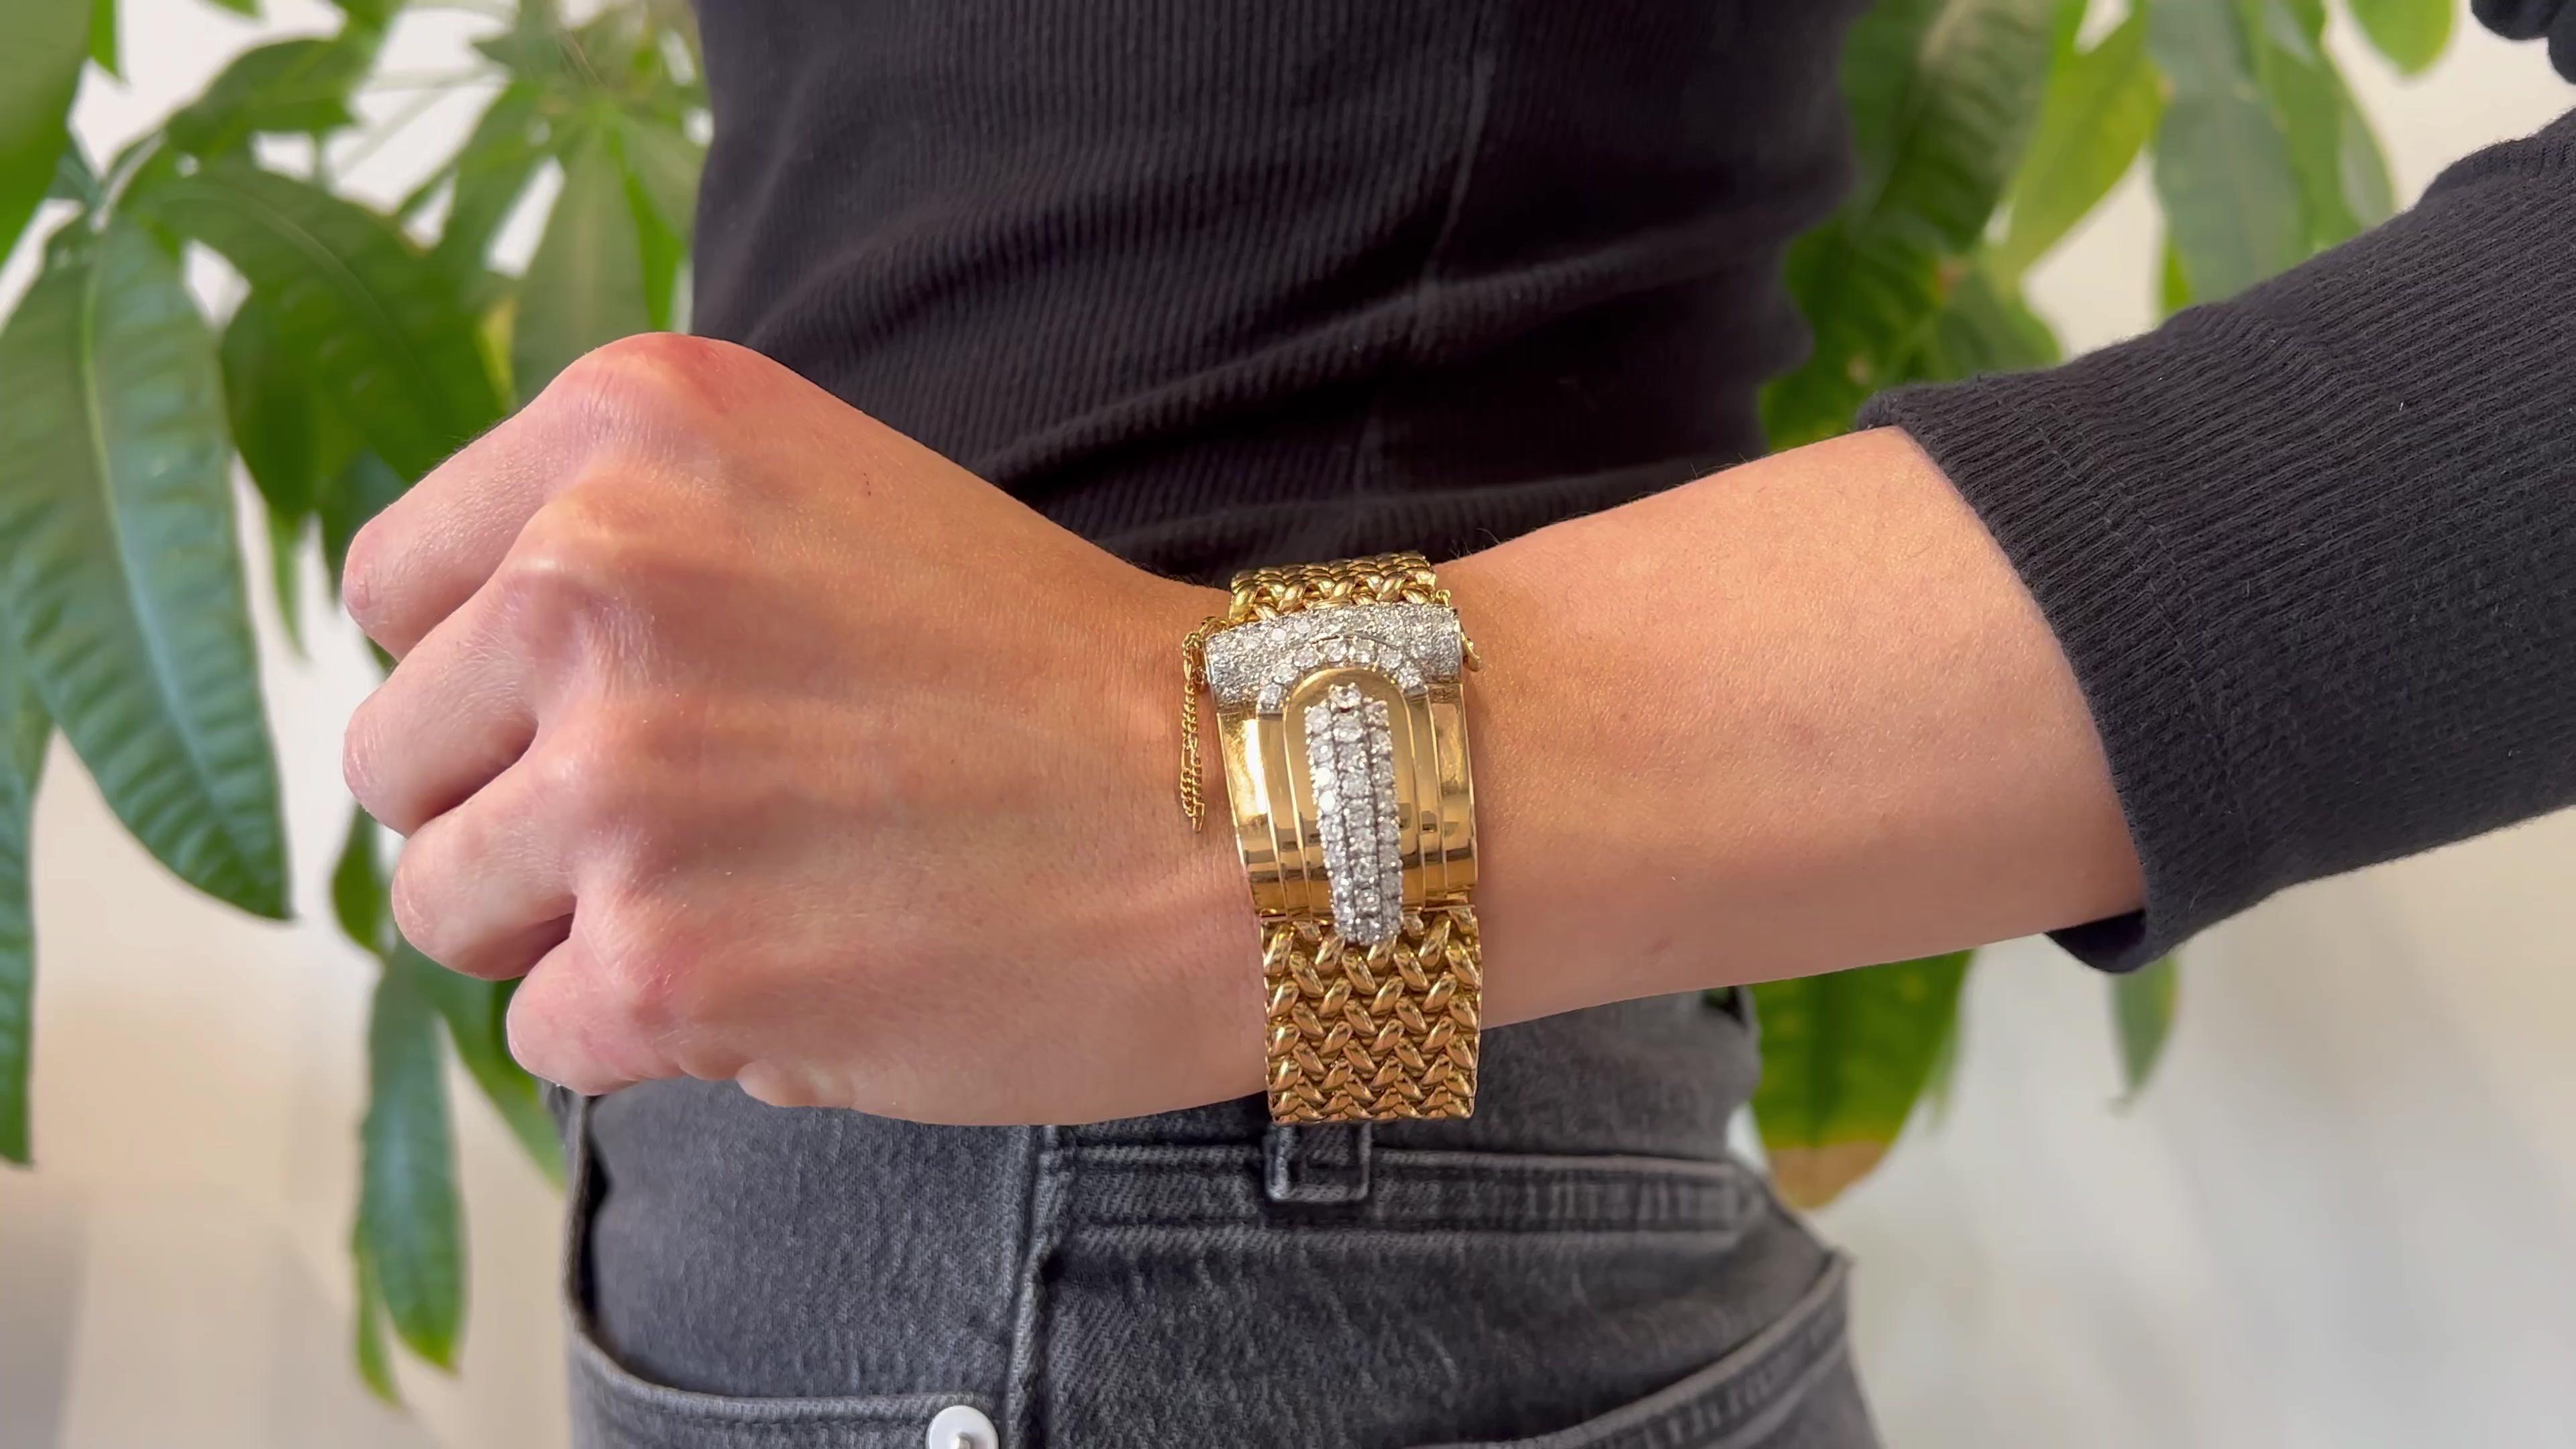 One Retro Diamond 18k Yellow Gold Convertible Tank Brooch Bracelet. Featuring 73 round brilliant cut diamonds with a total weight of approximately 3.65 carats, graded near-colorless, VS-SI clarity. Crafted in 18 karat yellow gold with diamonds set